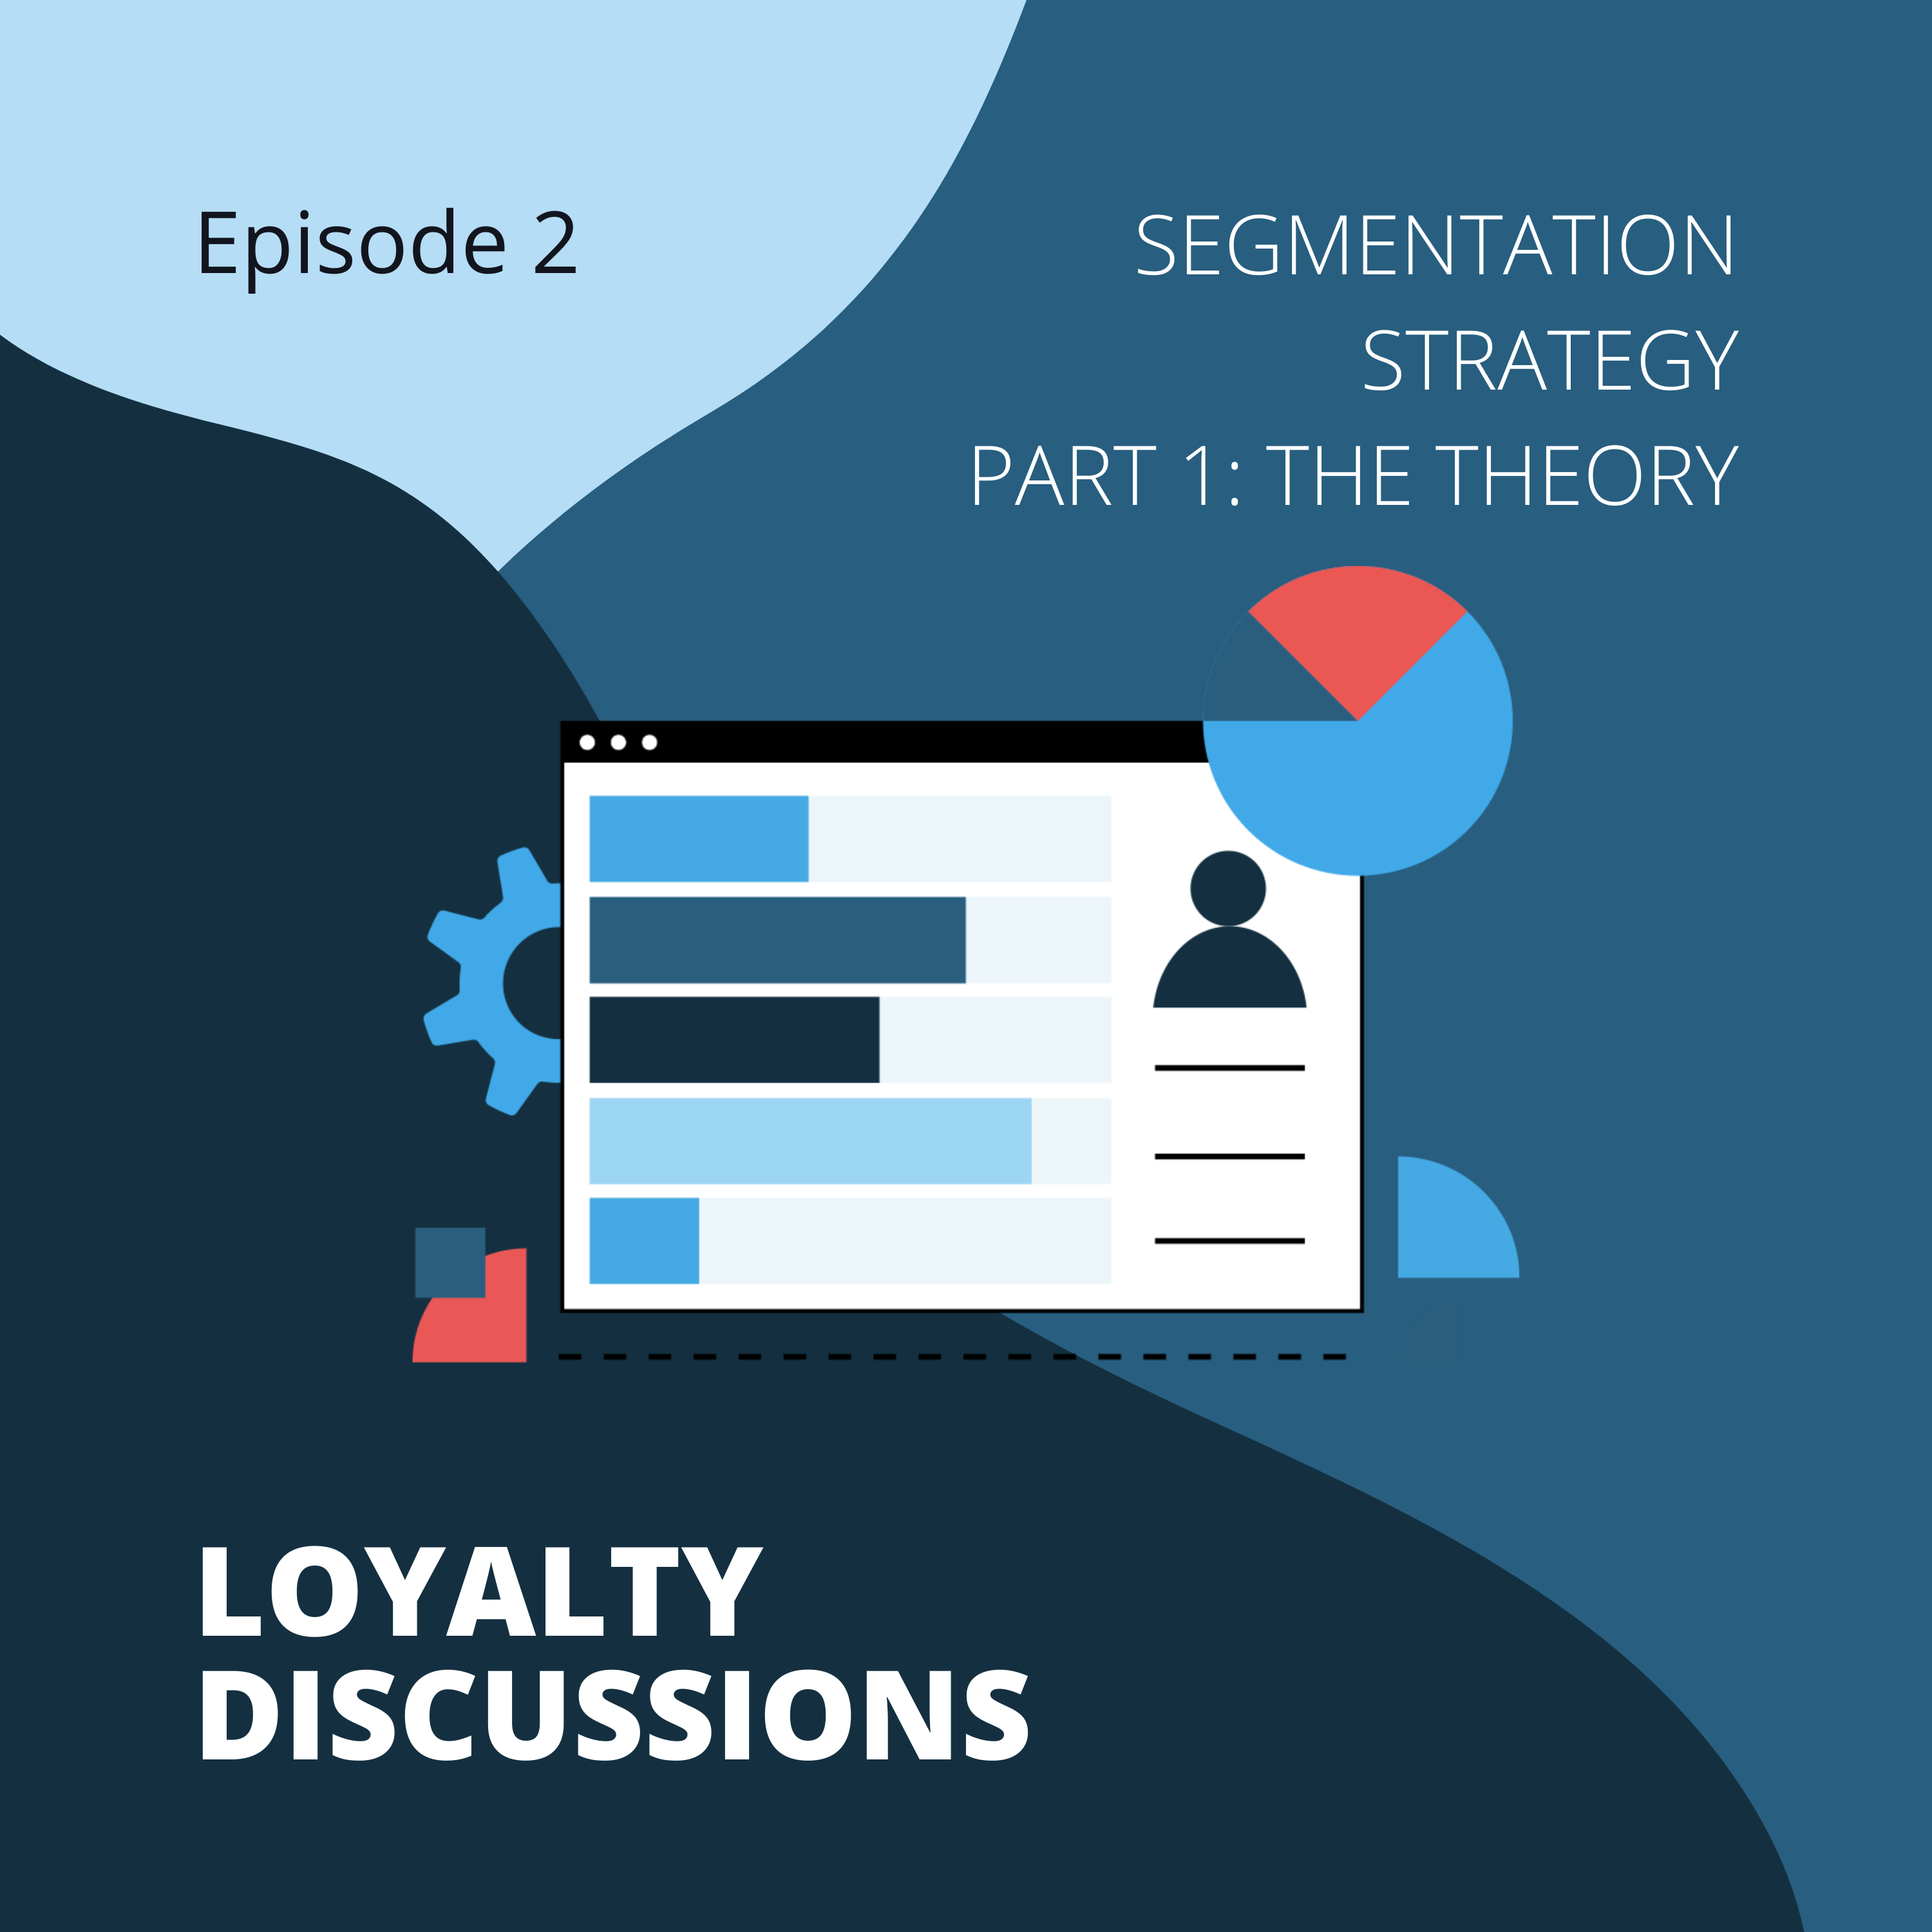 The growing importance of segmentation strategy - Part 1: the theory